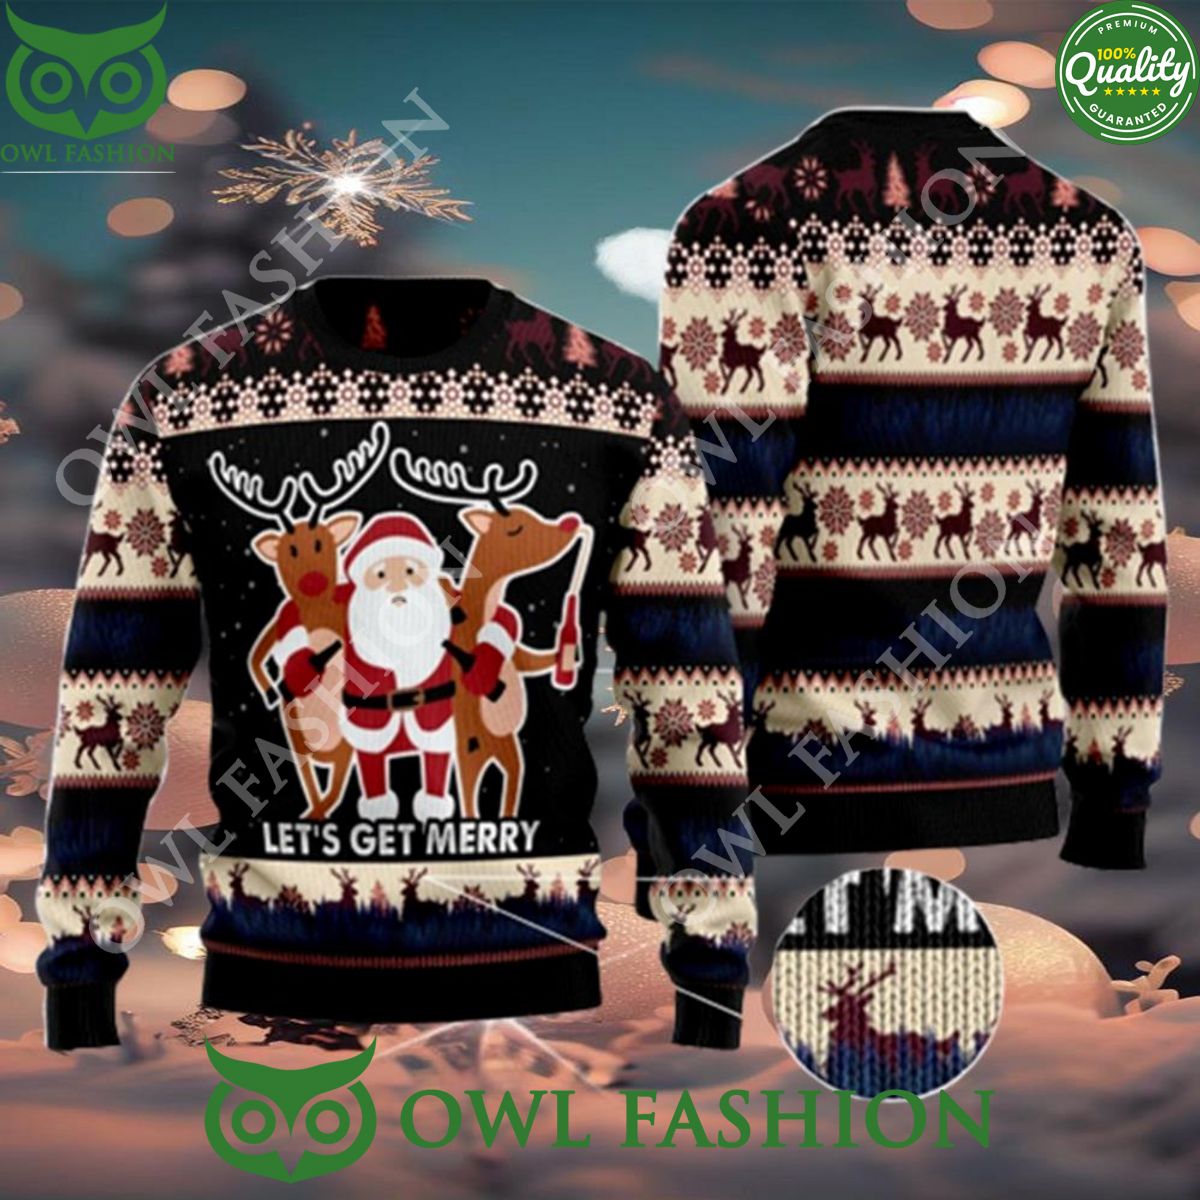 lets get merry christmas gift ugly christmas sweater jumper xmas holiday 1 h1LvZ.jpg